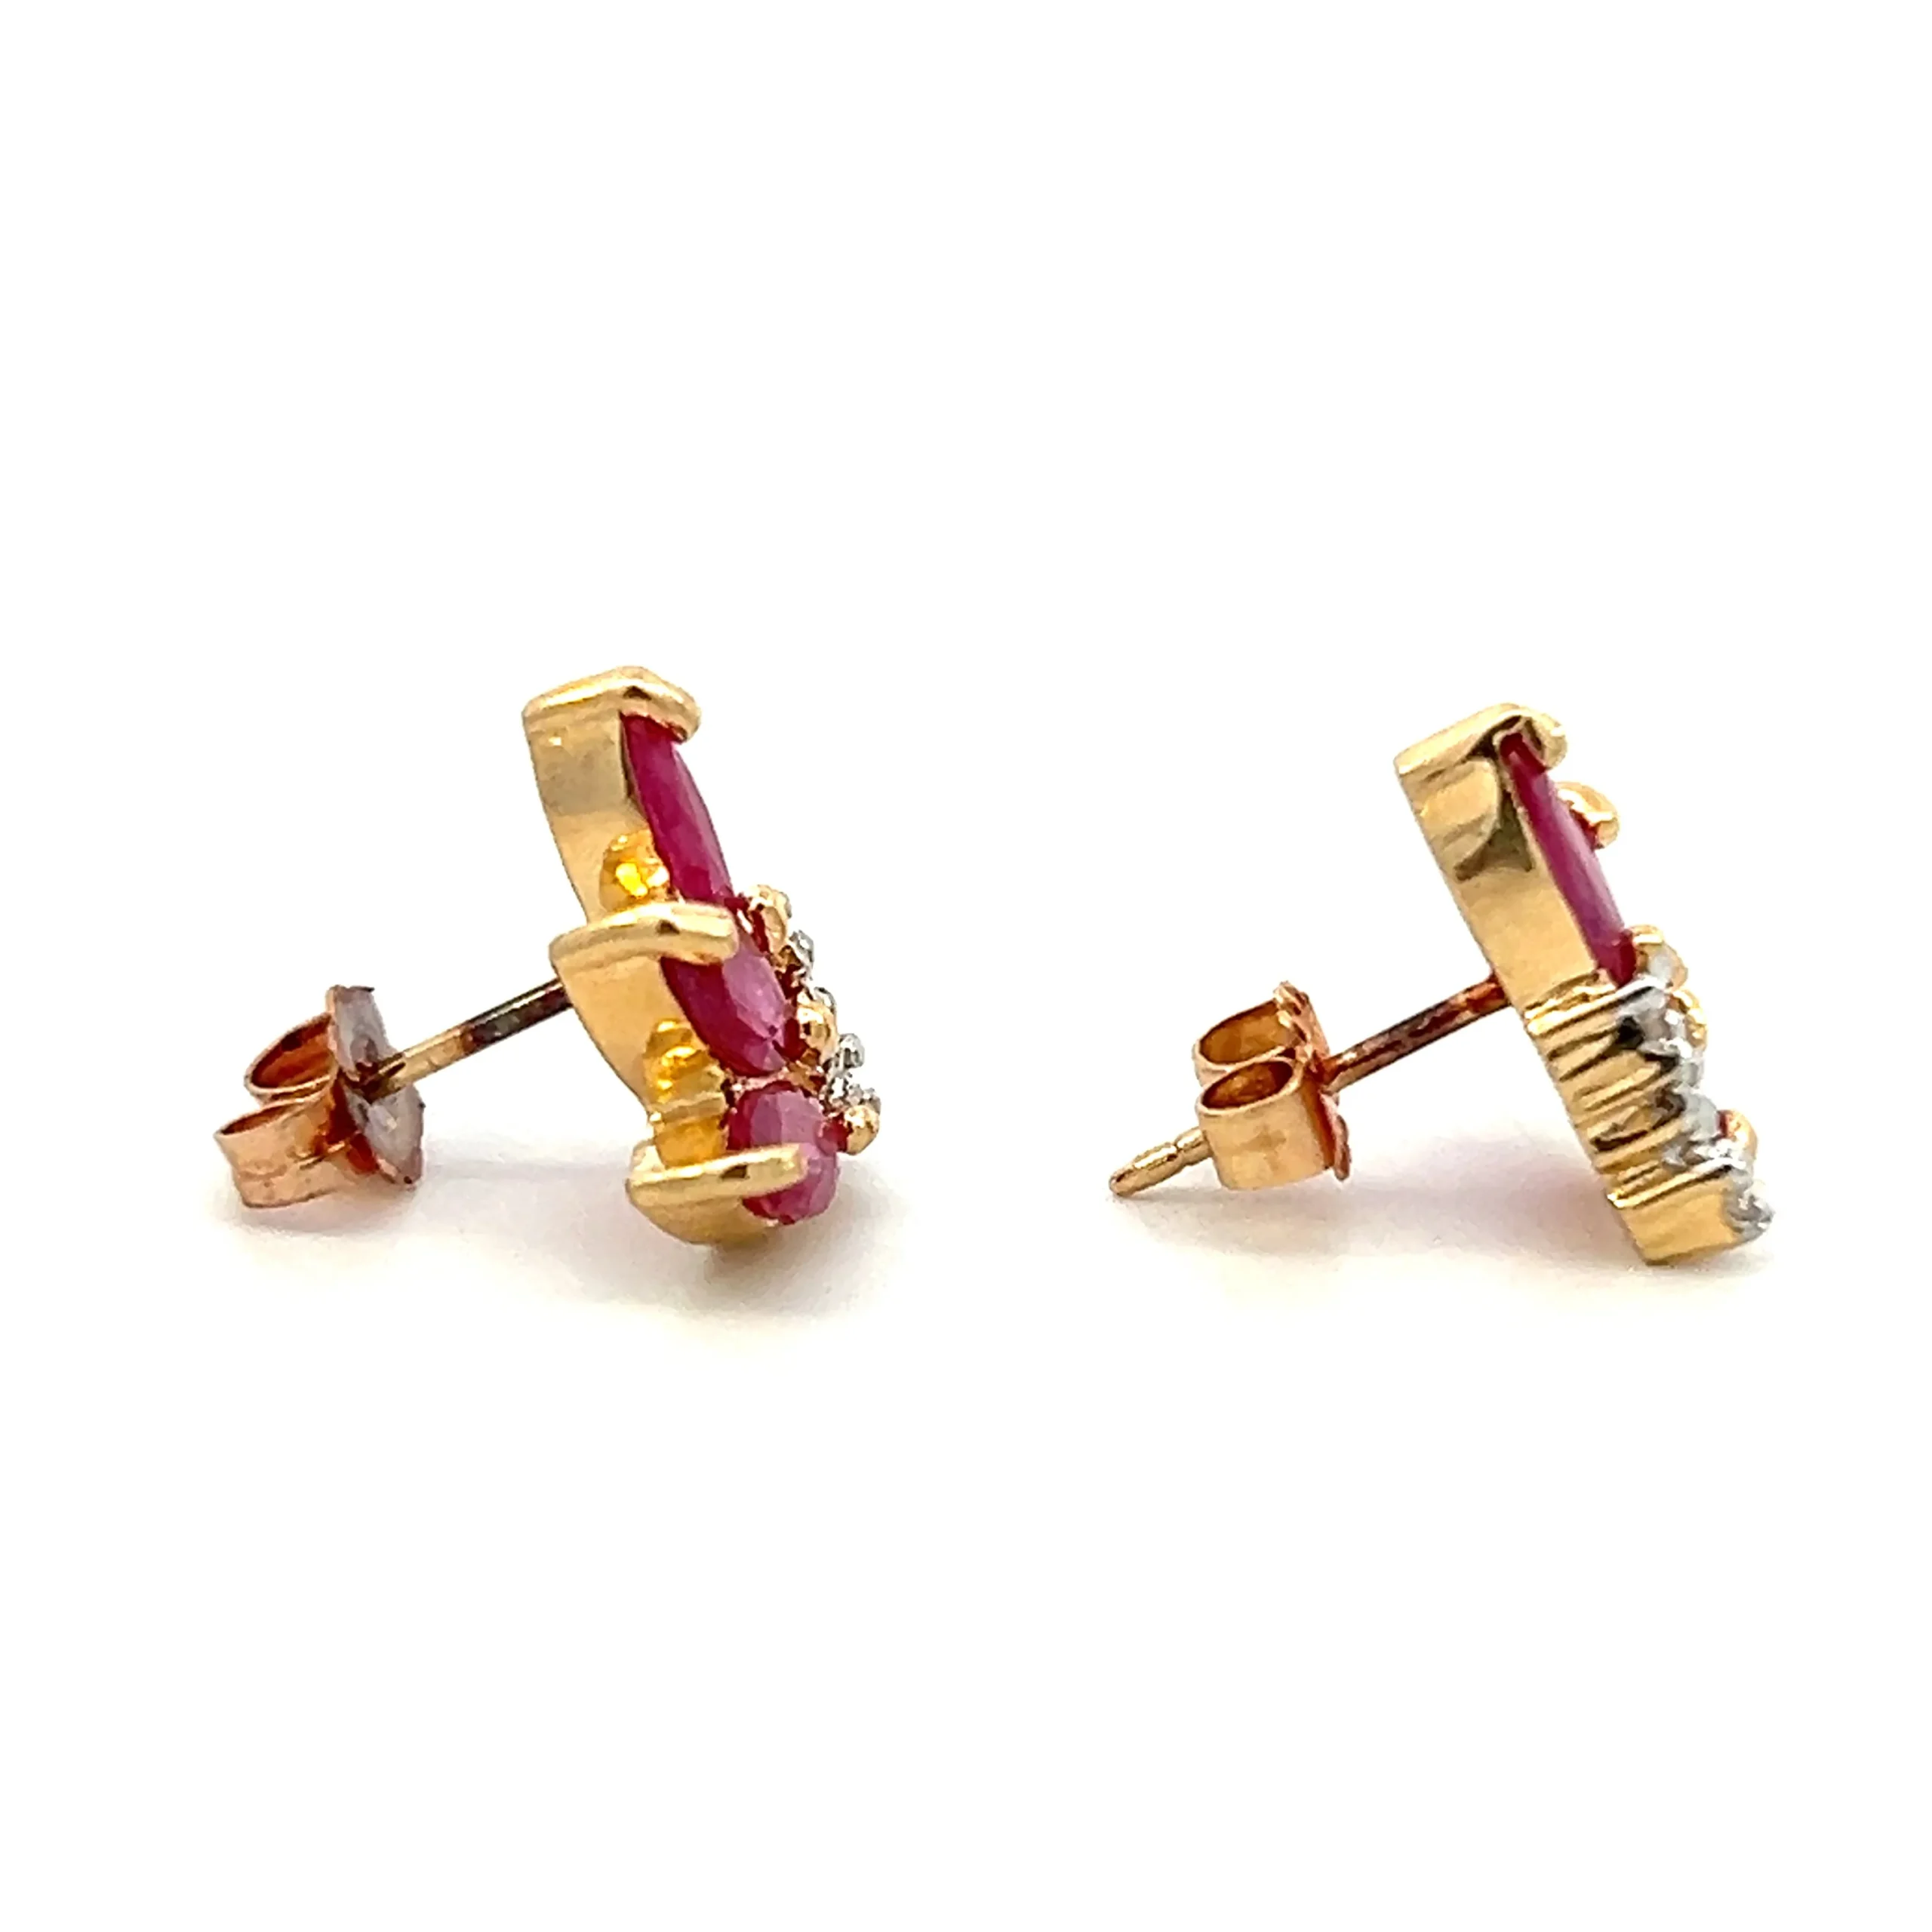 ne estate pair of 14 karat yellow gold stud earrings set with 6 marquise synthetic rubies weighing 1.24 total carat weight and 6 round brilliant diamonds weighing 0.03 total carat weight with matching j color and i2 clarity. Each earring is arranged in such a way to give an impression of a tropical flower or flamelike appearance. secured with friction posts and backs.